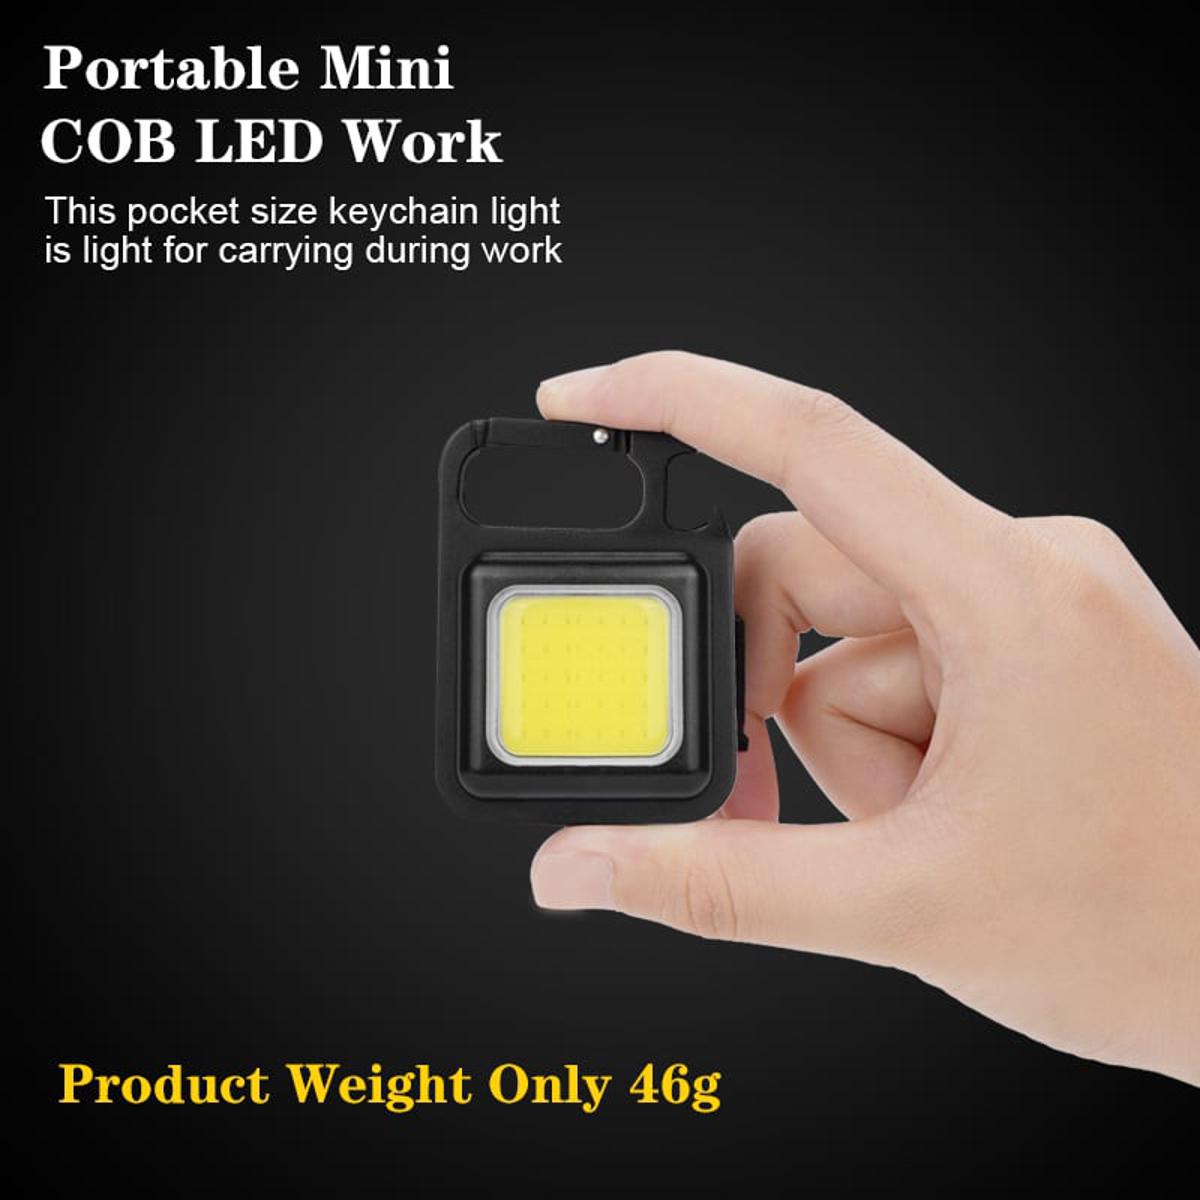 MINI Light with Magnet Clamp for Video Conference Lighting, Clip on LED Ring Light for Computer Webcam, USB Laptop Light for Zoom Meetings, Reading Light Rechargeable No Ratings1 Answered Questions